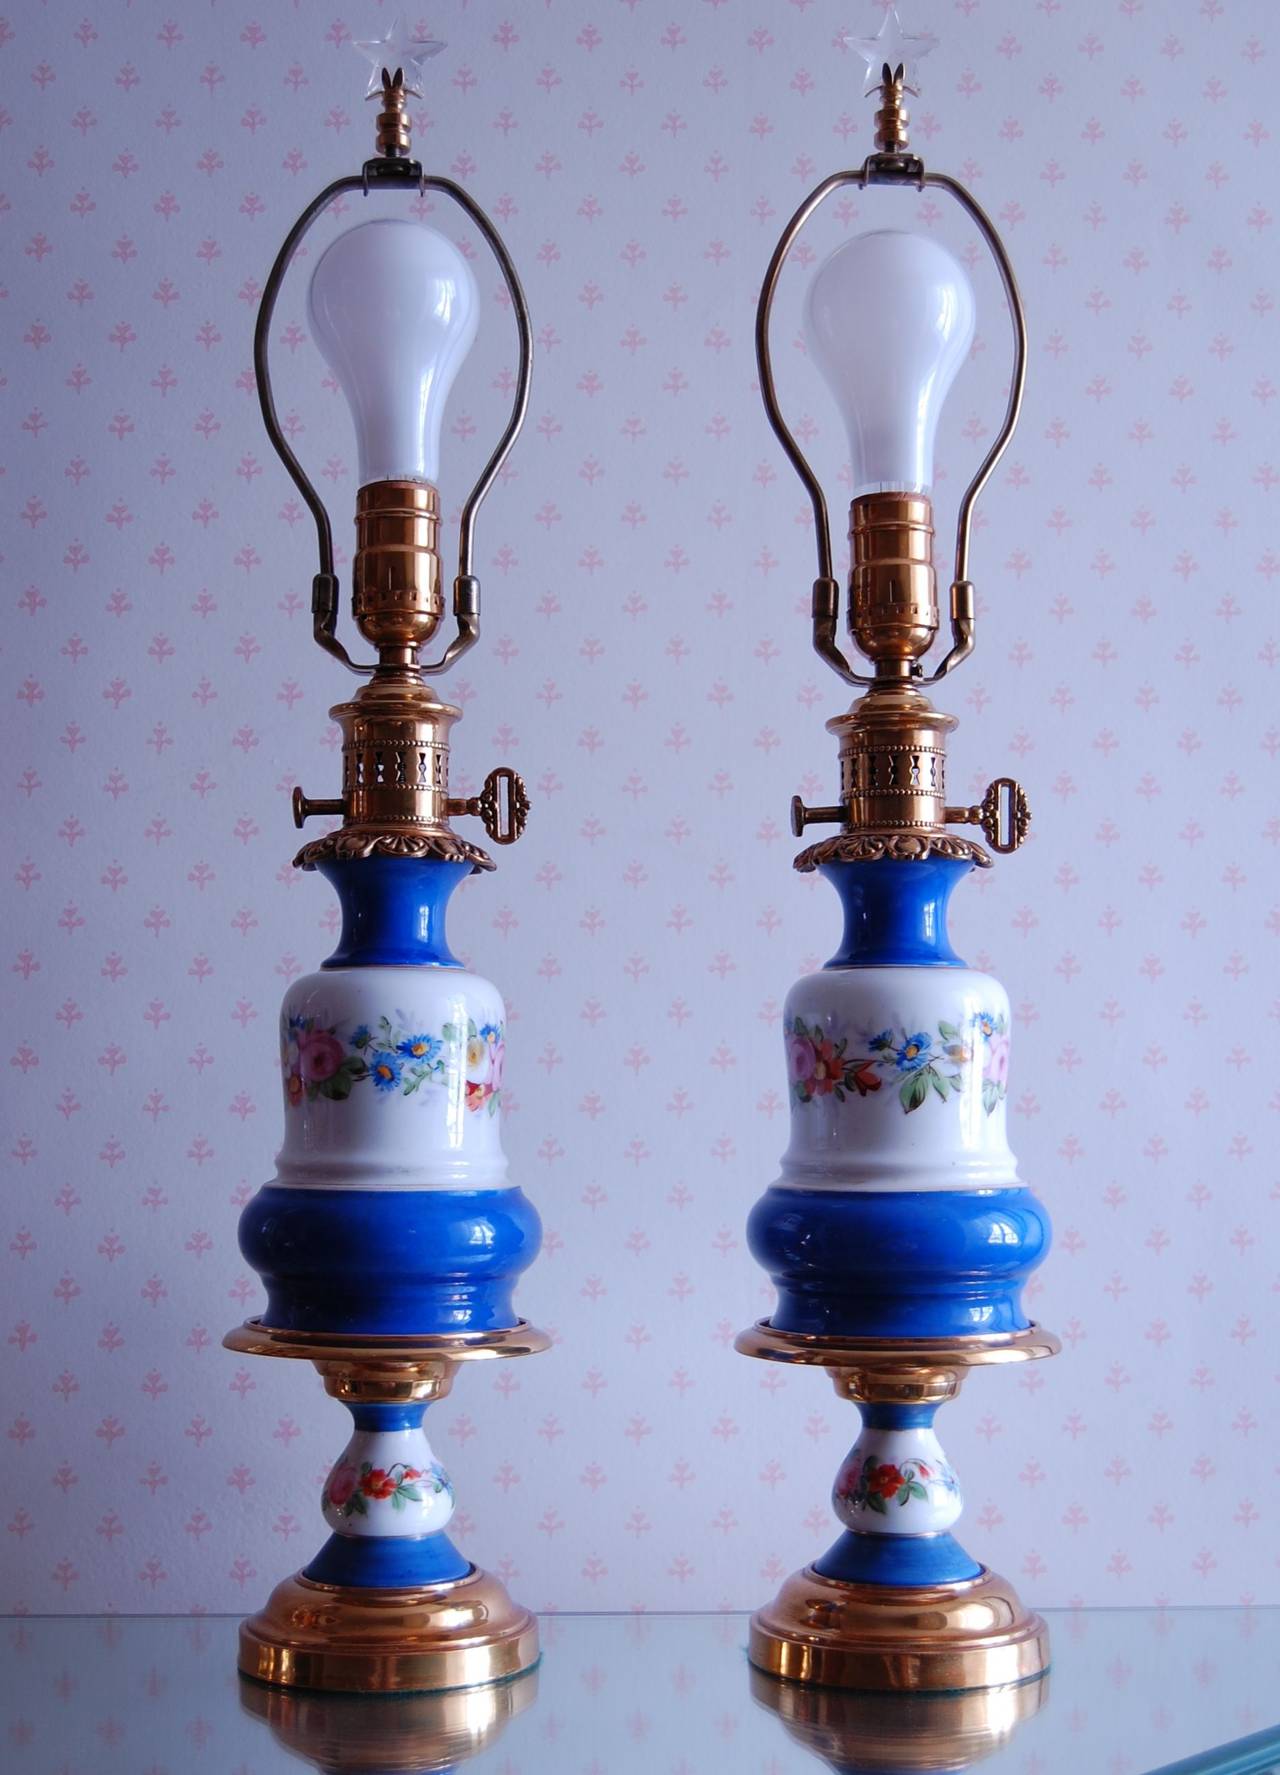 Pair of French oil lamps, circa 1850 with beautiful floral decorations on a white and blue background. It measures 14 inches to the top of the brass burner. Recently rewired with a three way socket, completely cleaned, polished and lacquered.